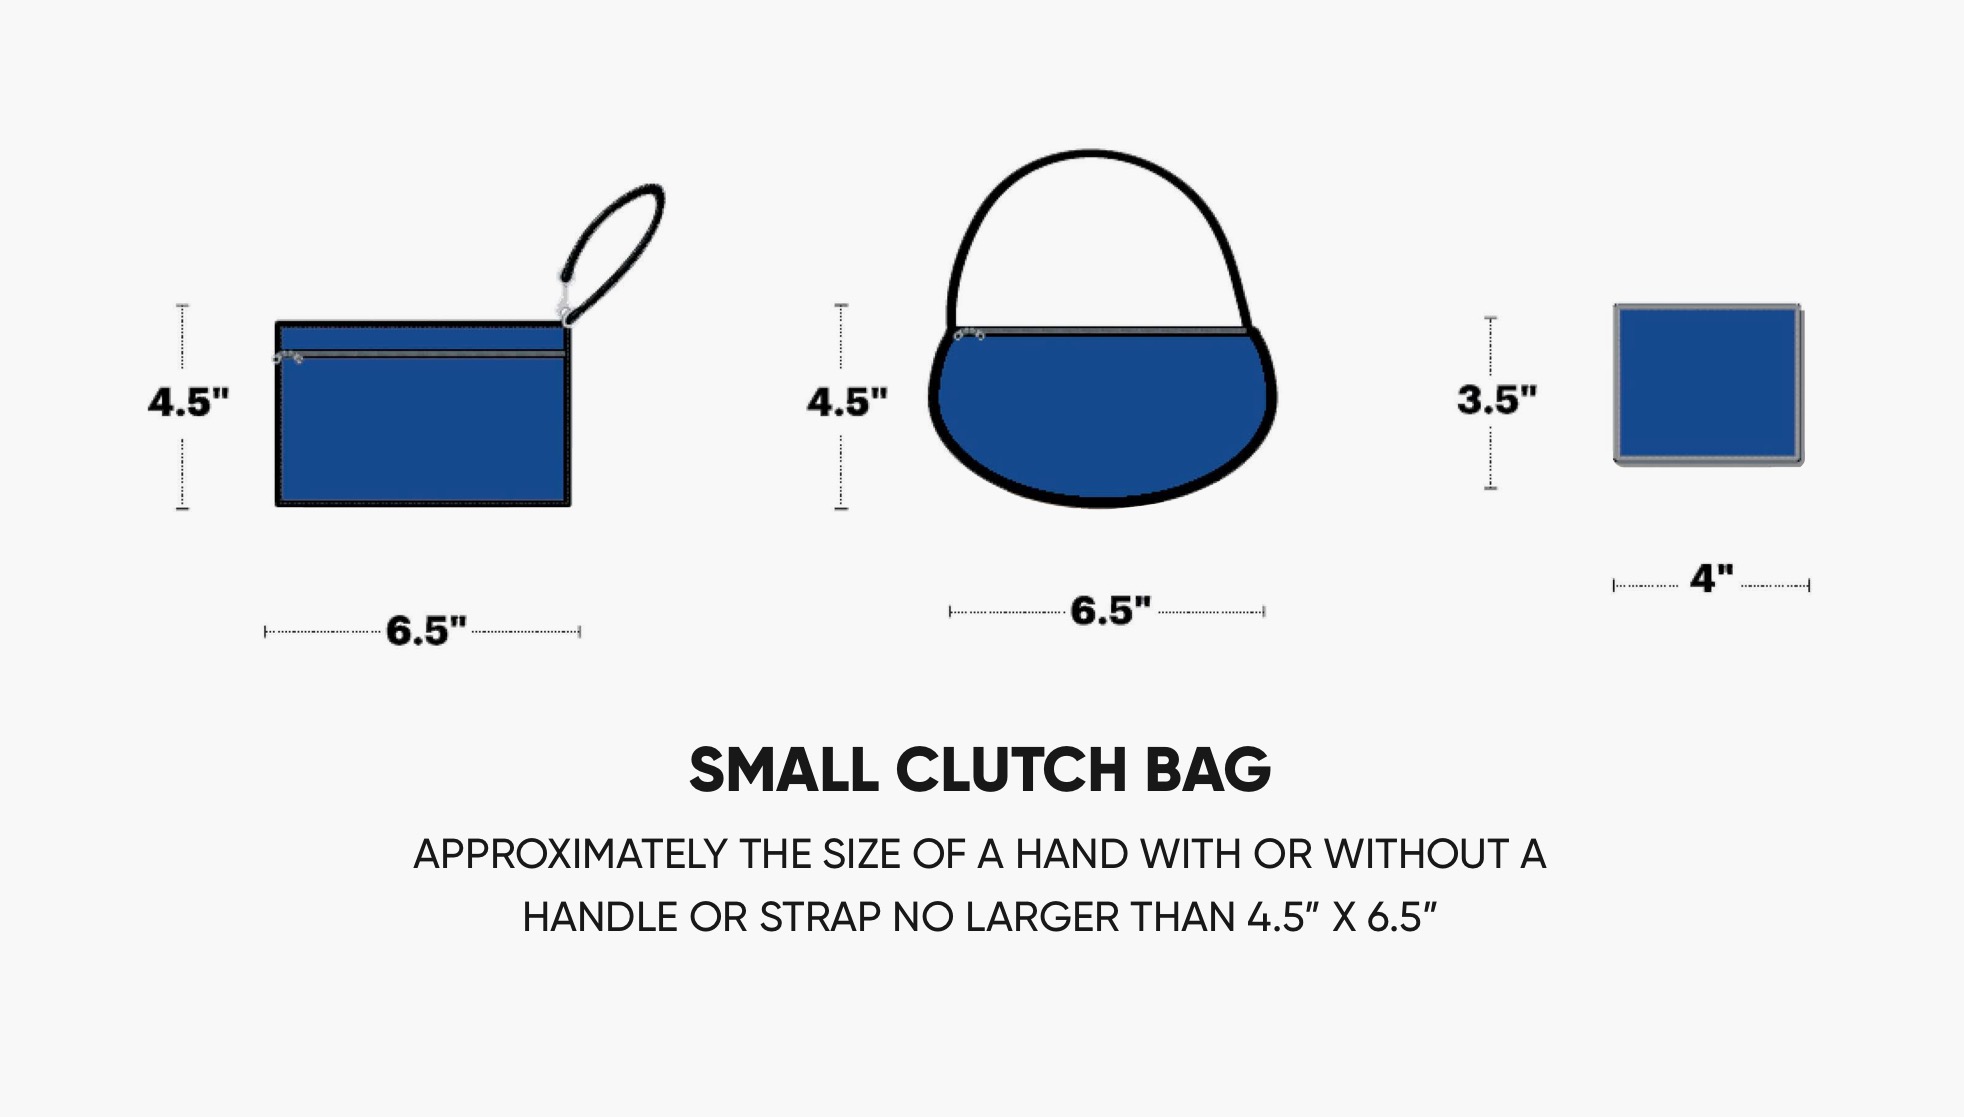 Approved sizes for small clutch bags